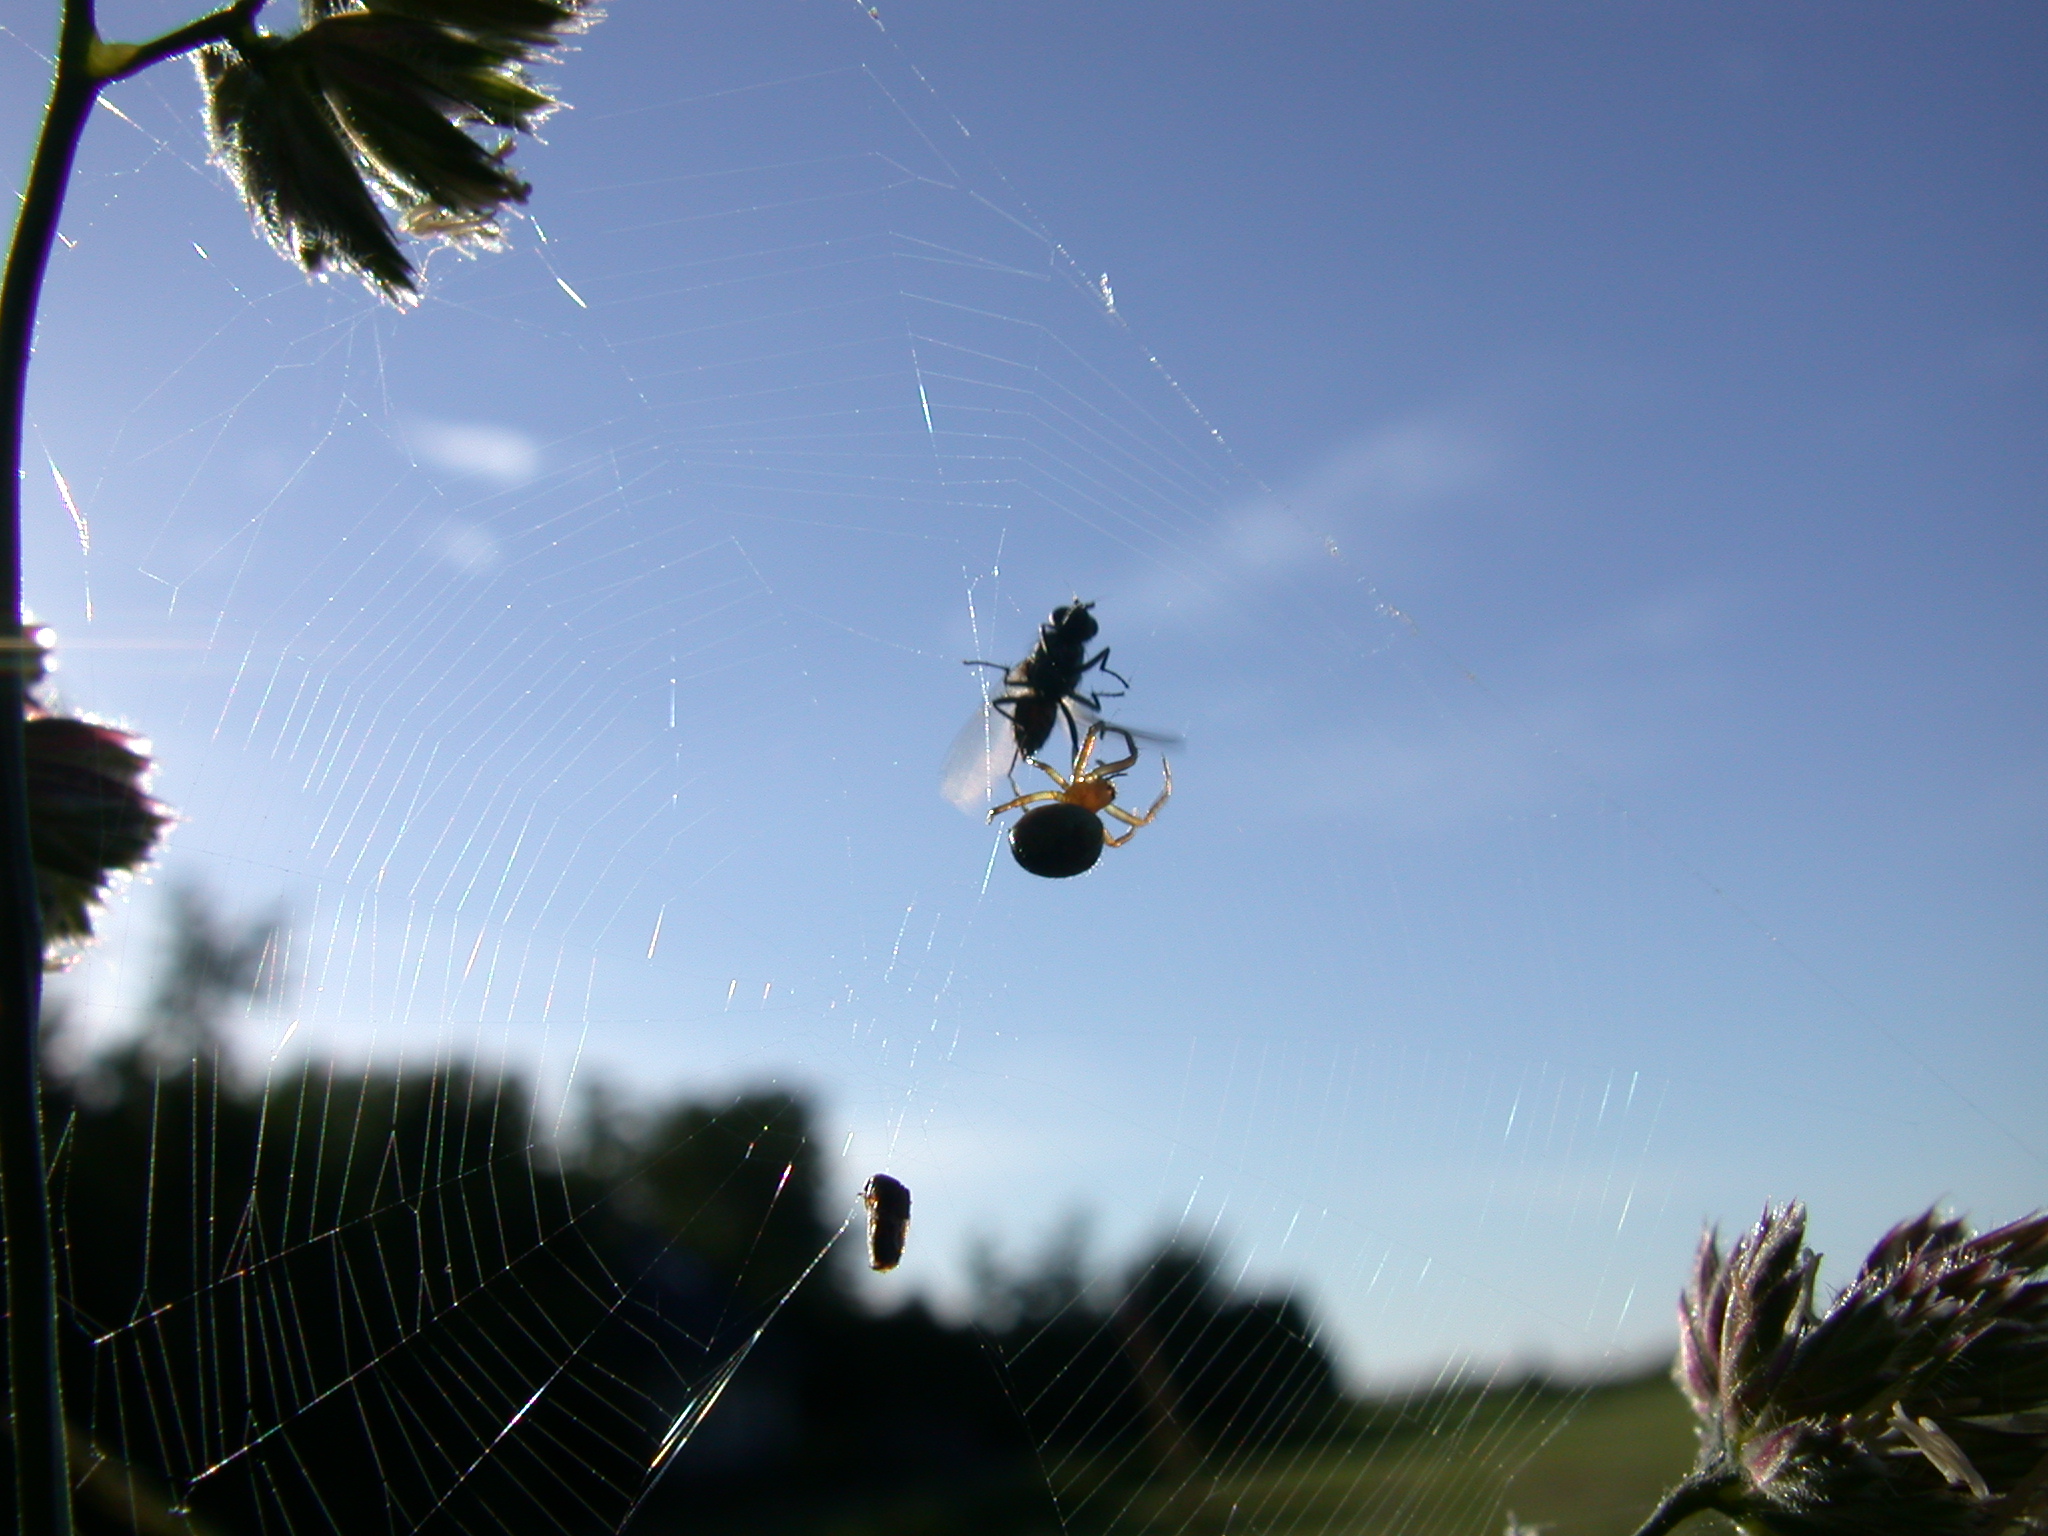 caught garden insect nature spider spinning web